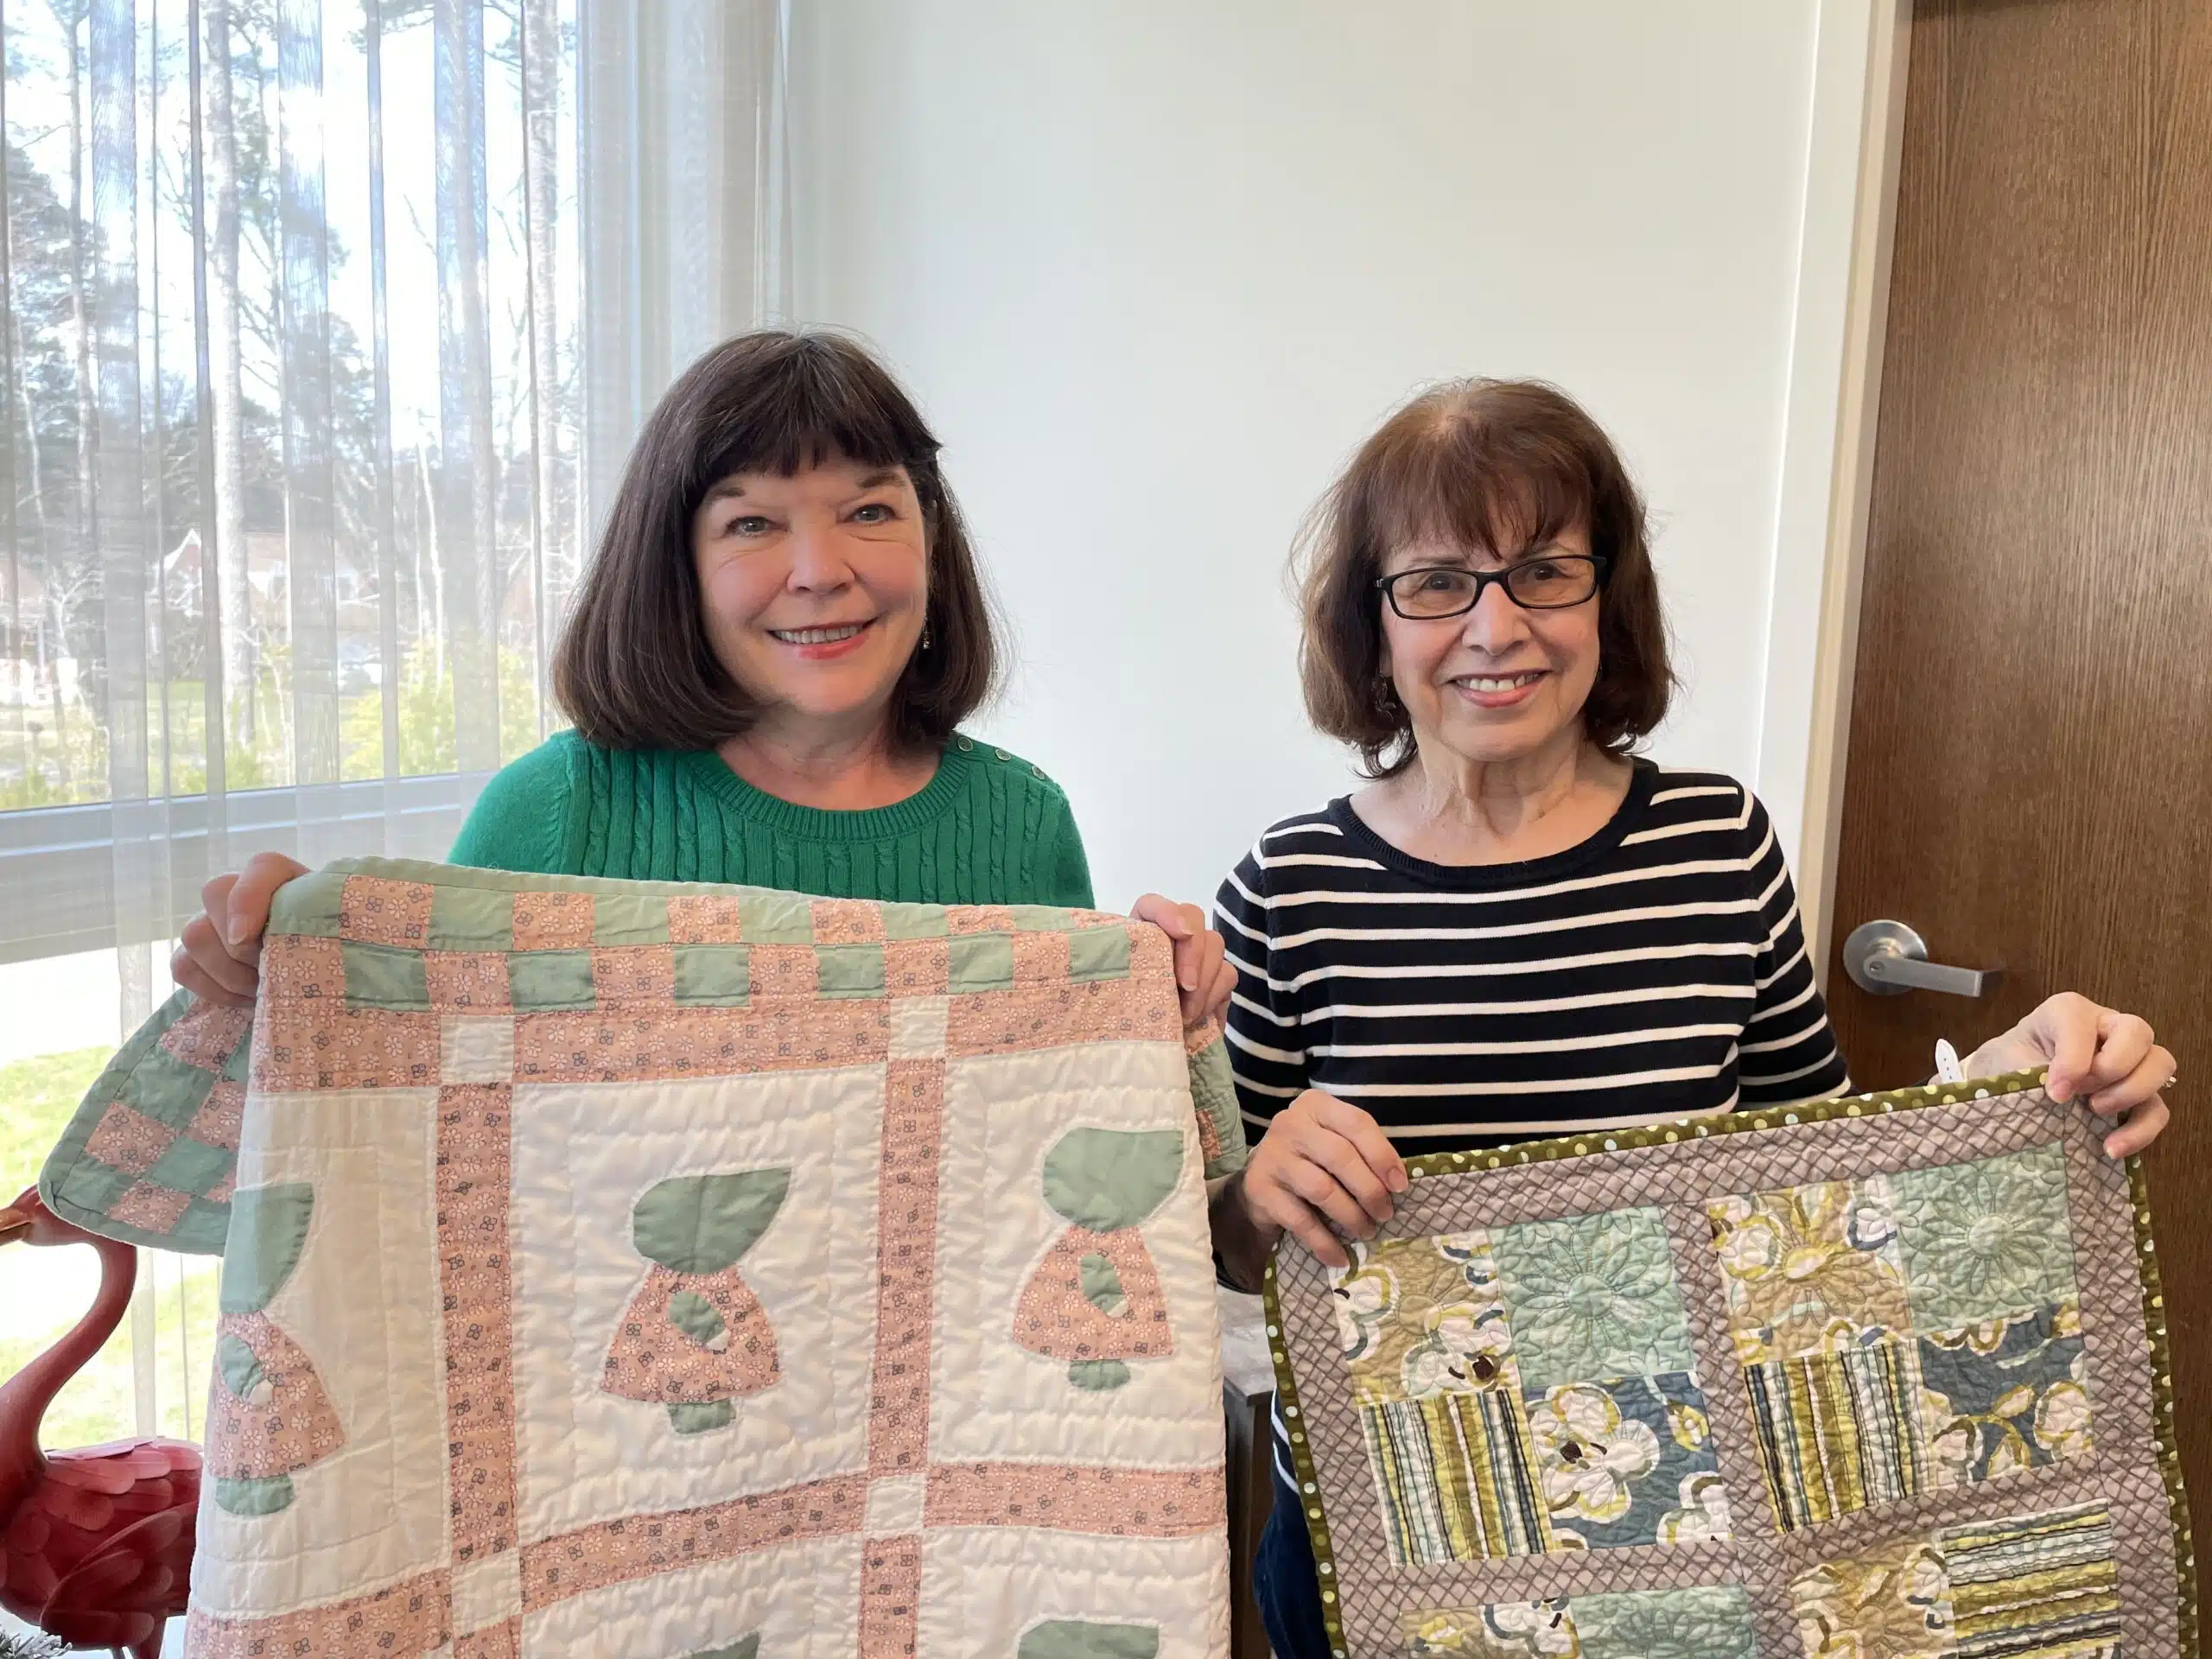 Gala Damato and her friend (and neighbor) Pam visit The Hamilton monthly to do a quilting activity with the Residents.